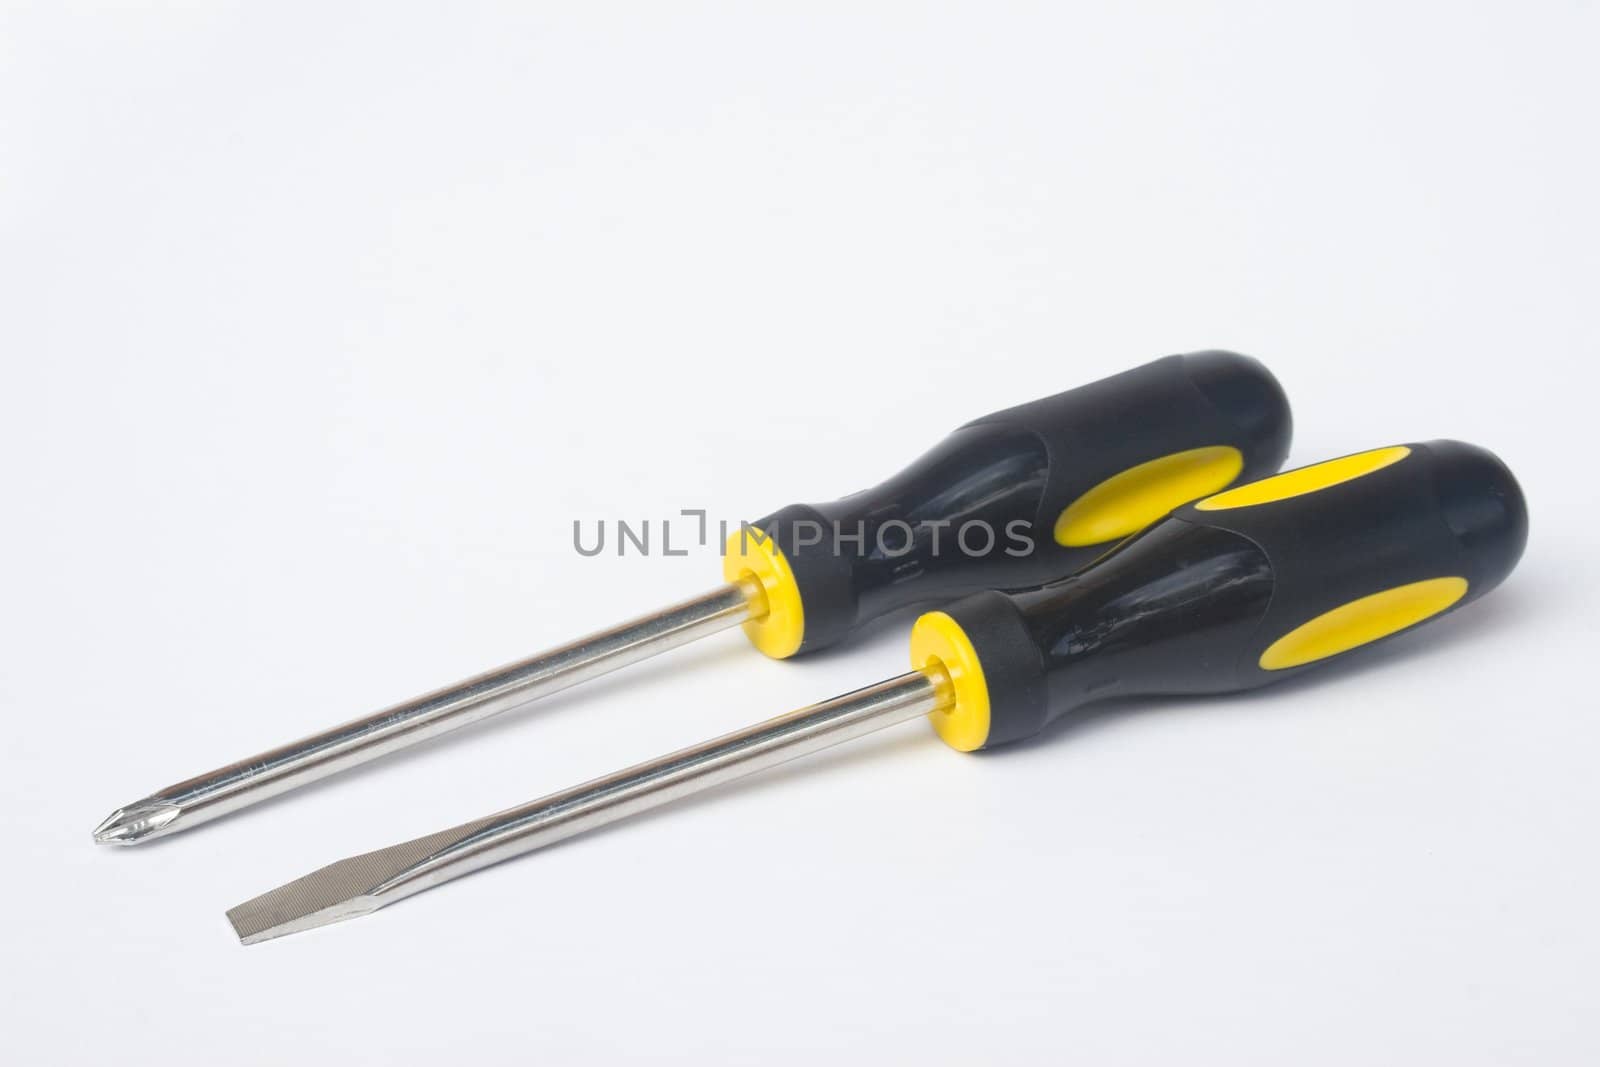 Two yellow and black manual screwdrivers isolated on white background